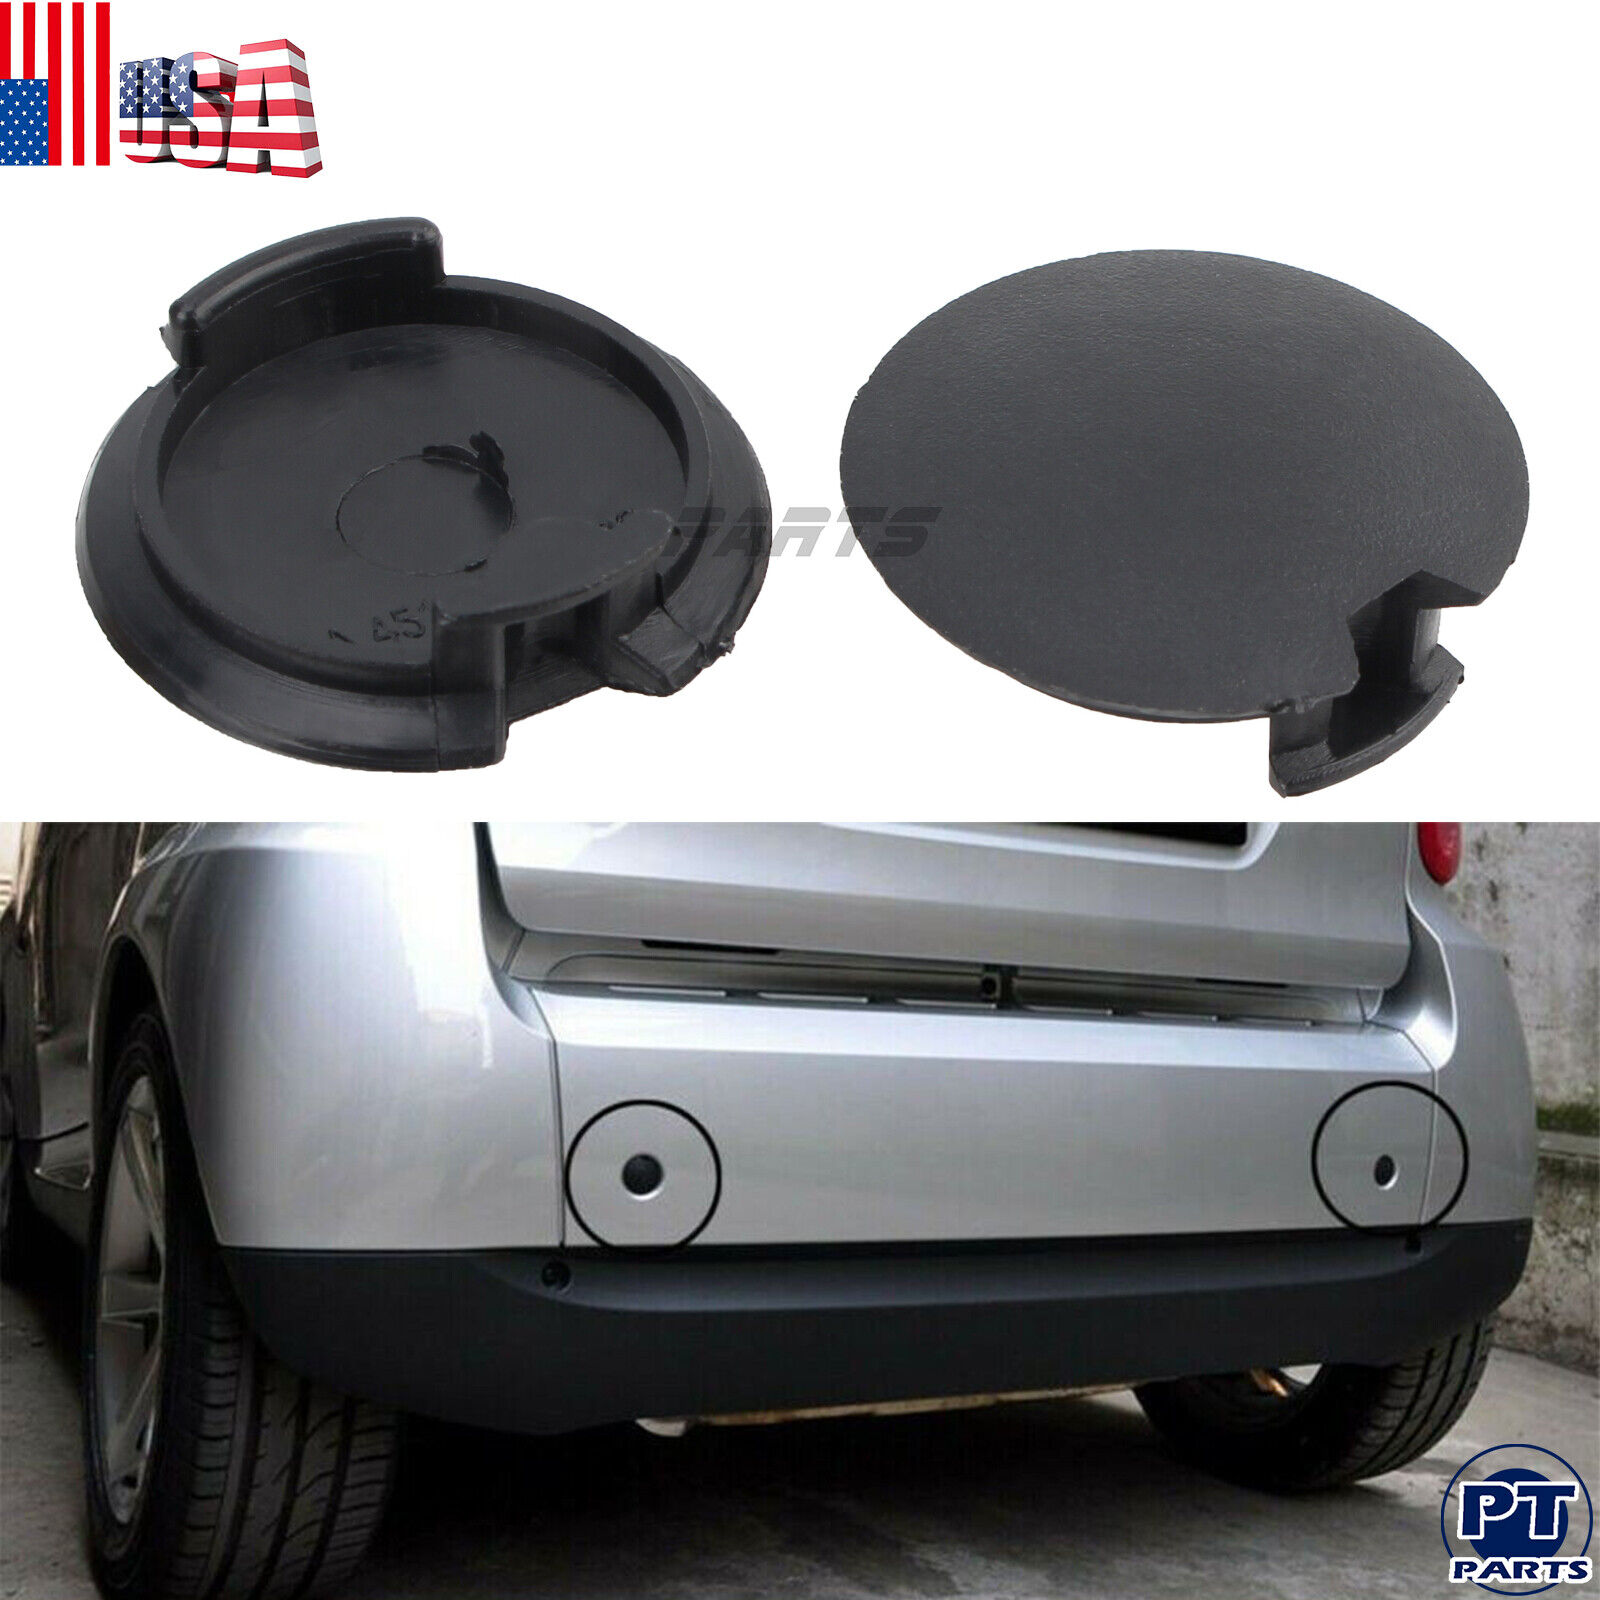 Bumper Towing Eye Cover Tow Cap Plug For Smart Fortwo 2008-2016 4518850122C22A